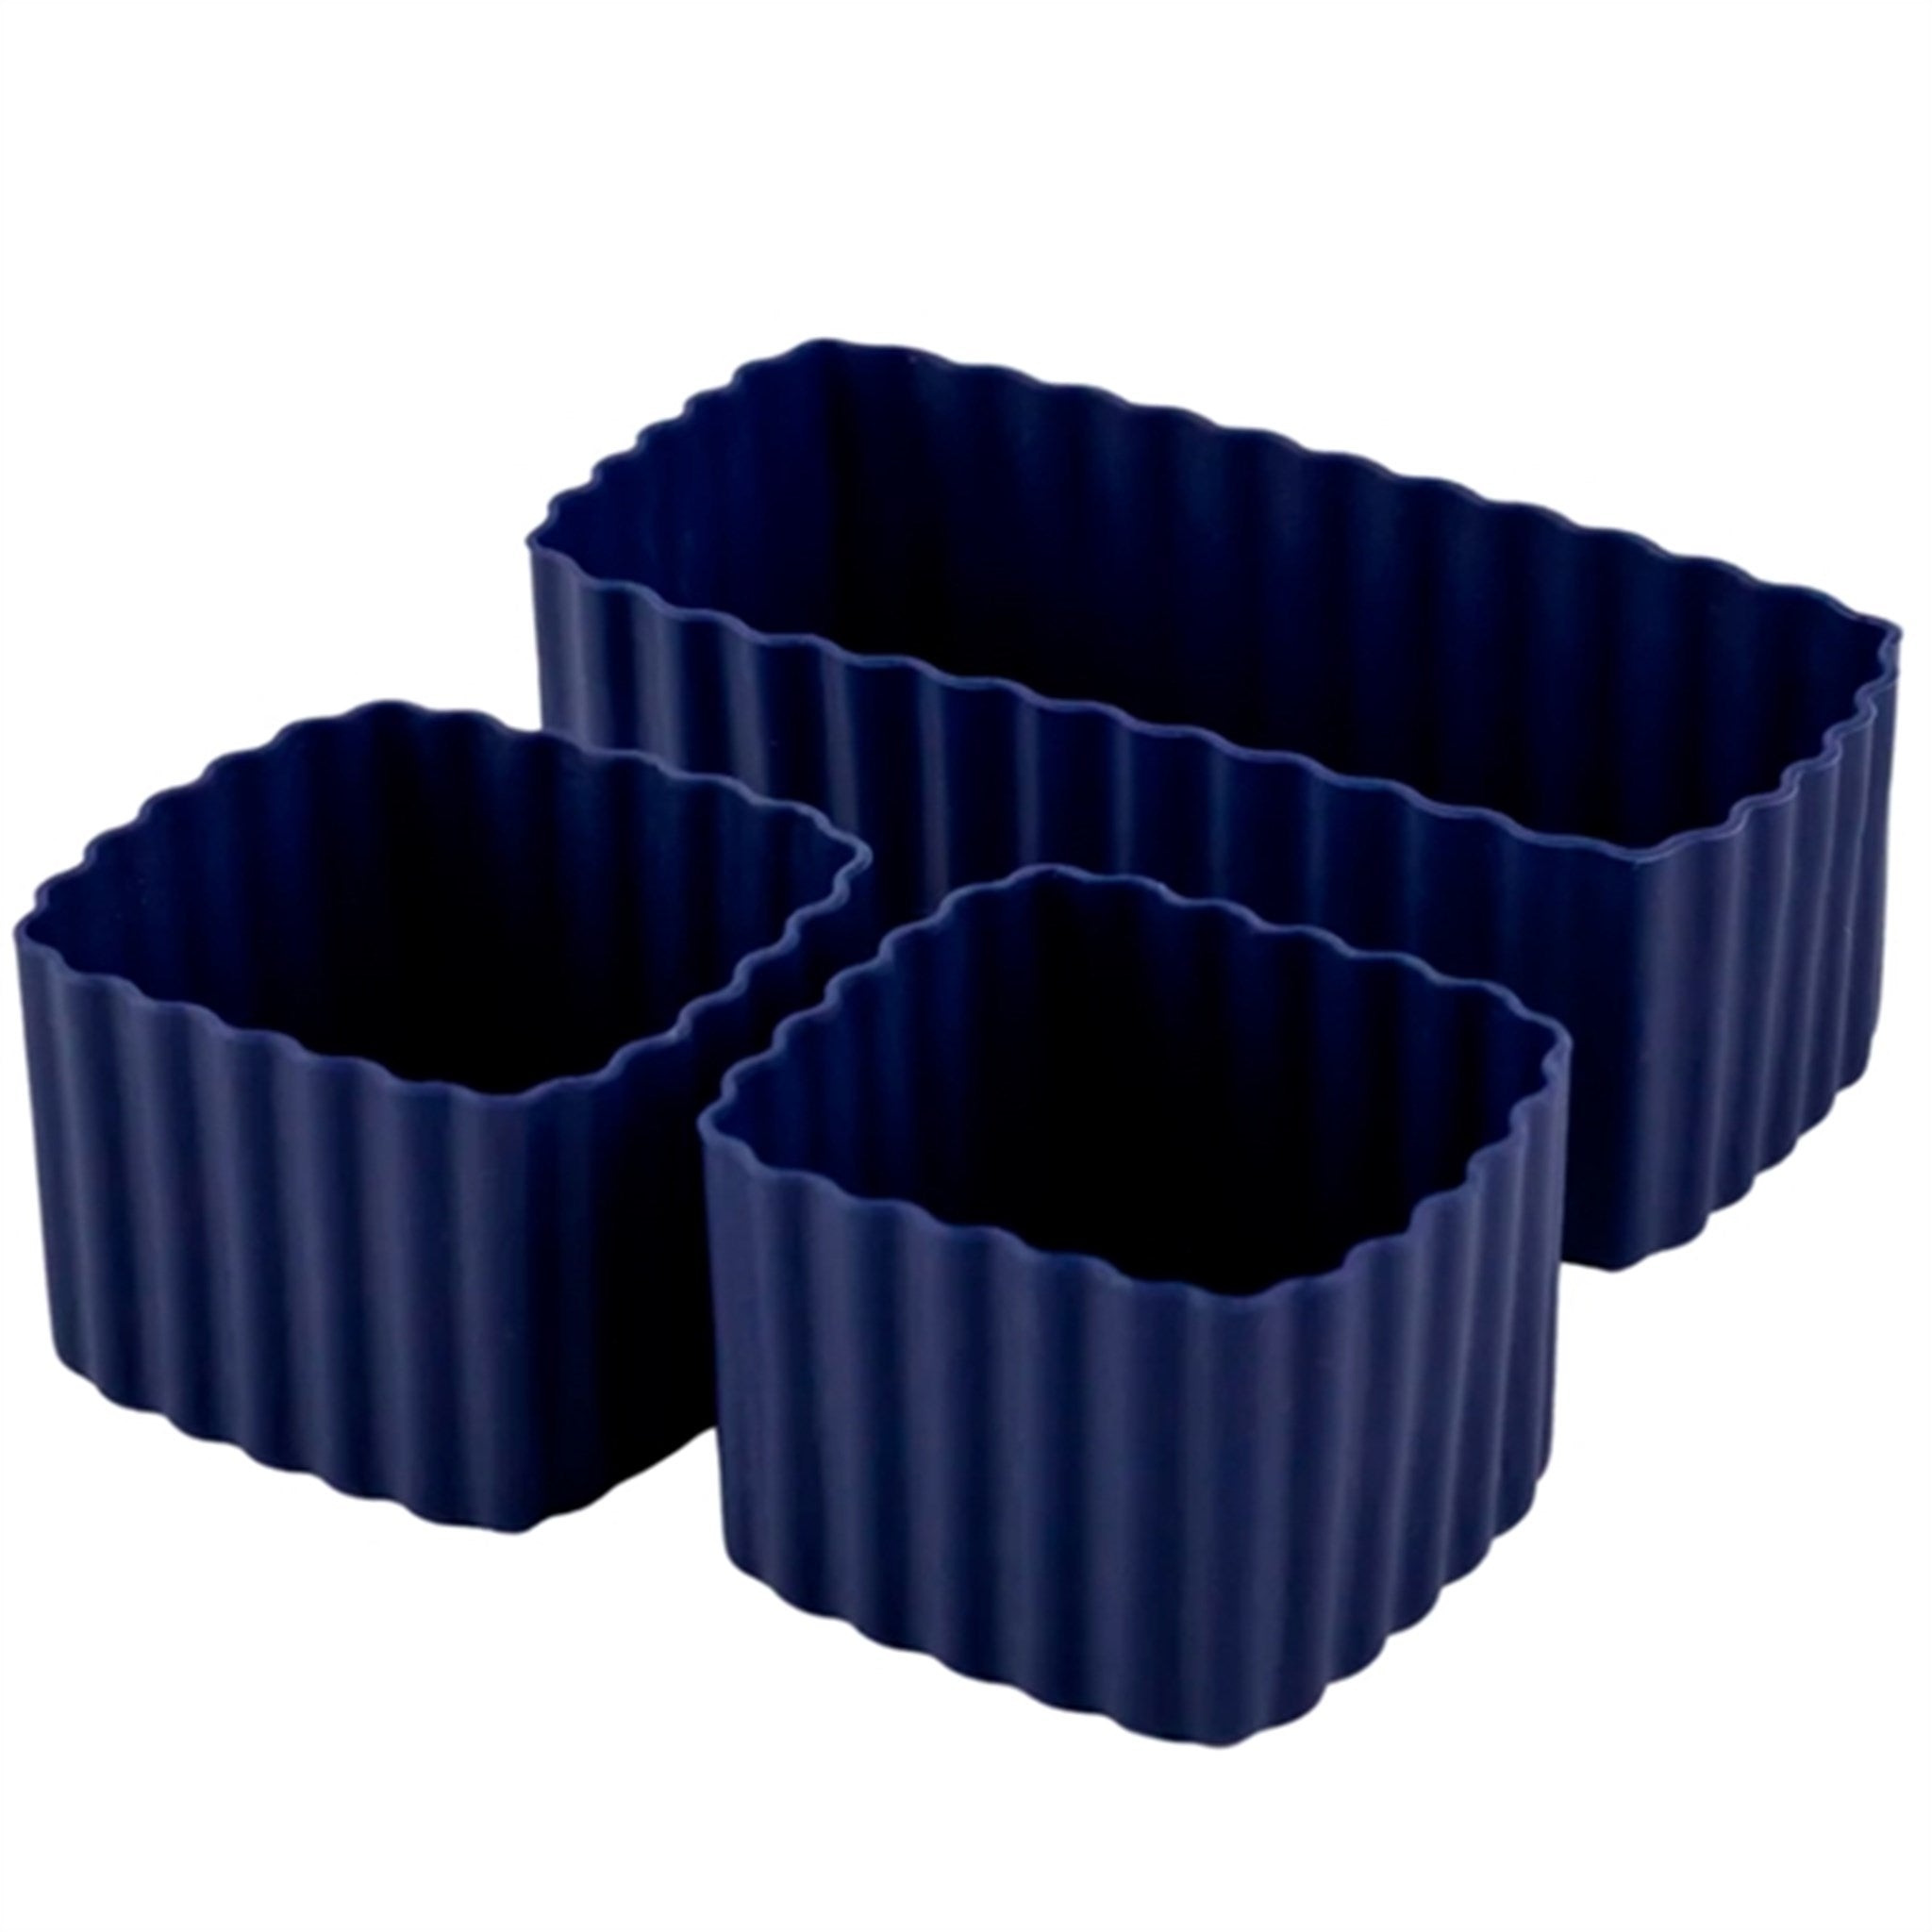 Little Lunch Box Co Bento Silicone Cups Mixed Elderberry